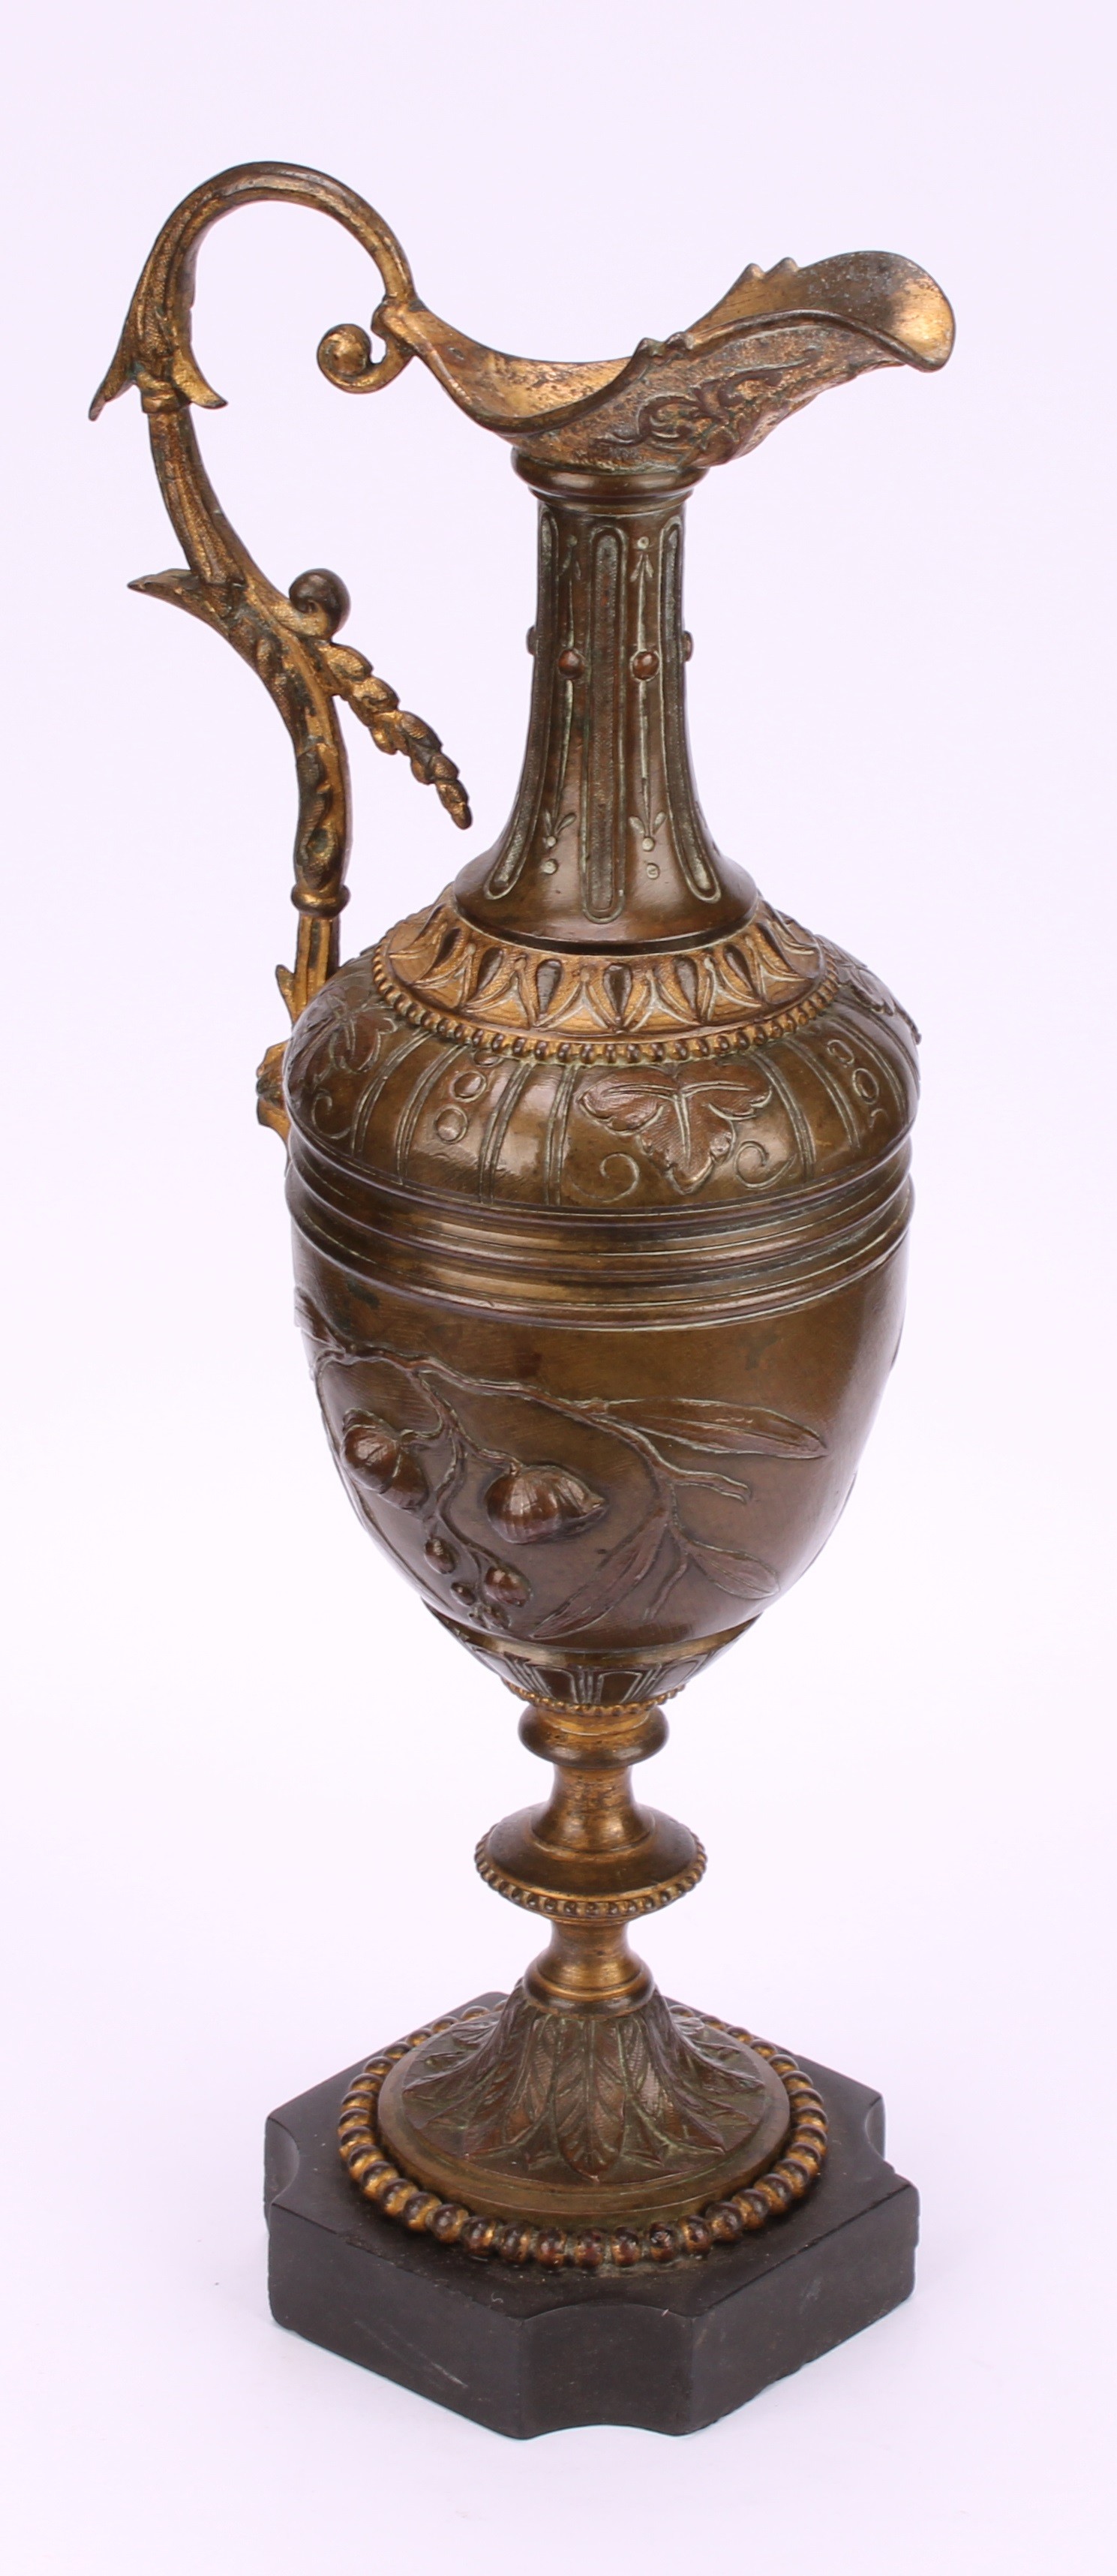 A 19th century Grand Tour ewer, cast with flowers and foliage, scroll handle, knopped stem, black - Image 3 of 4